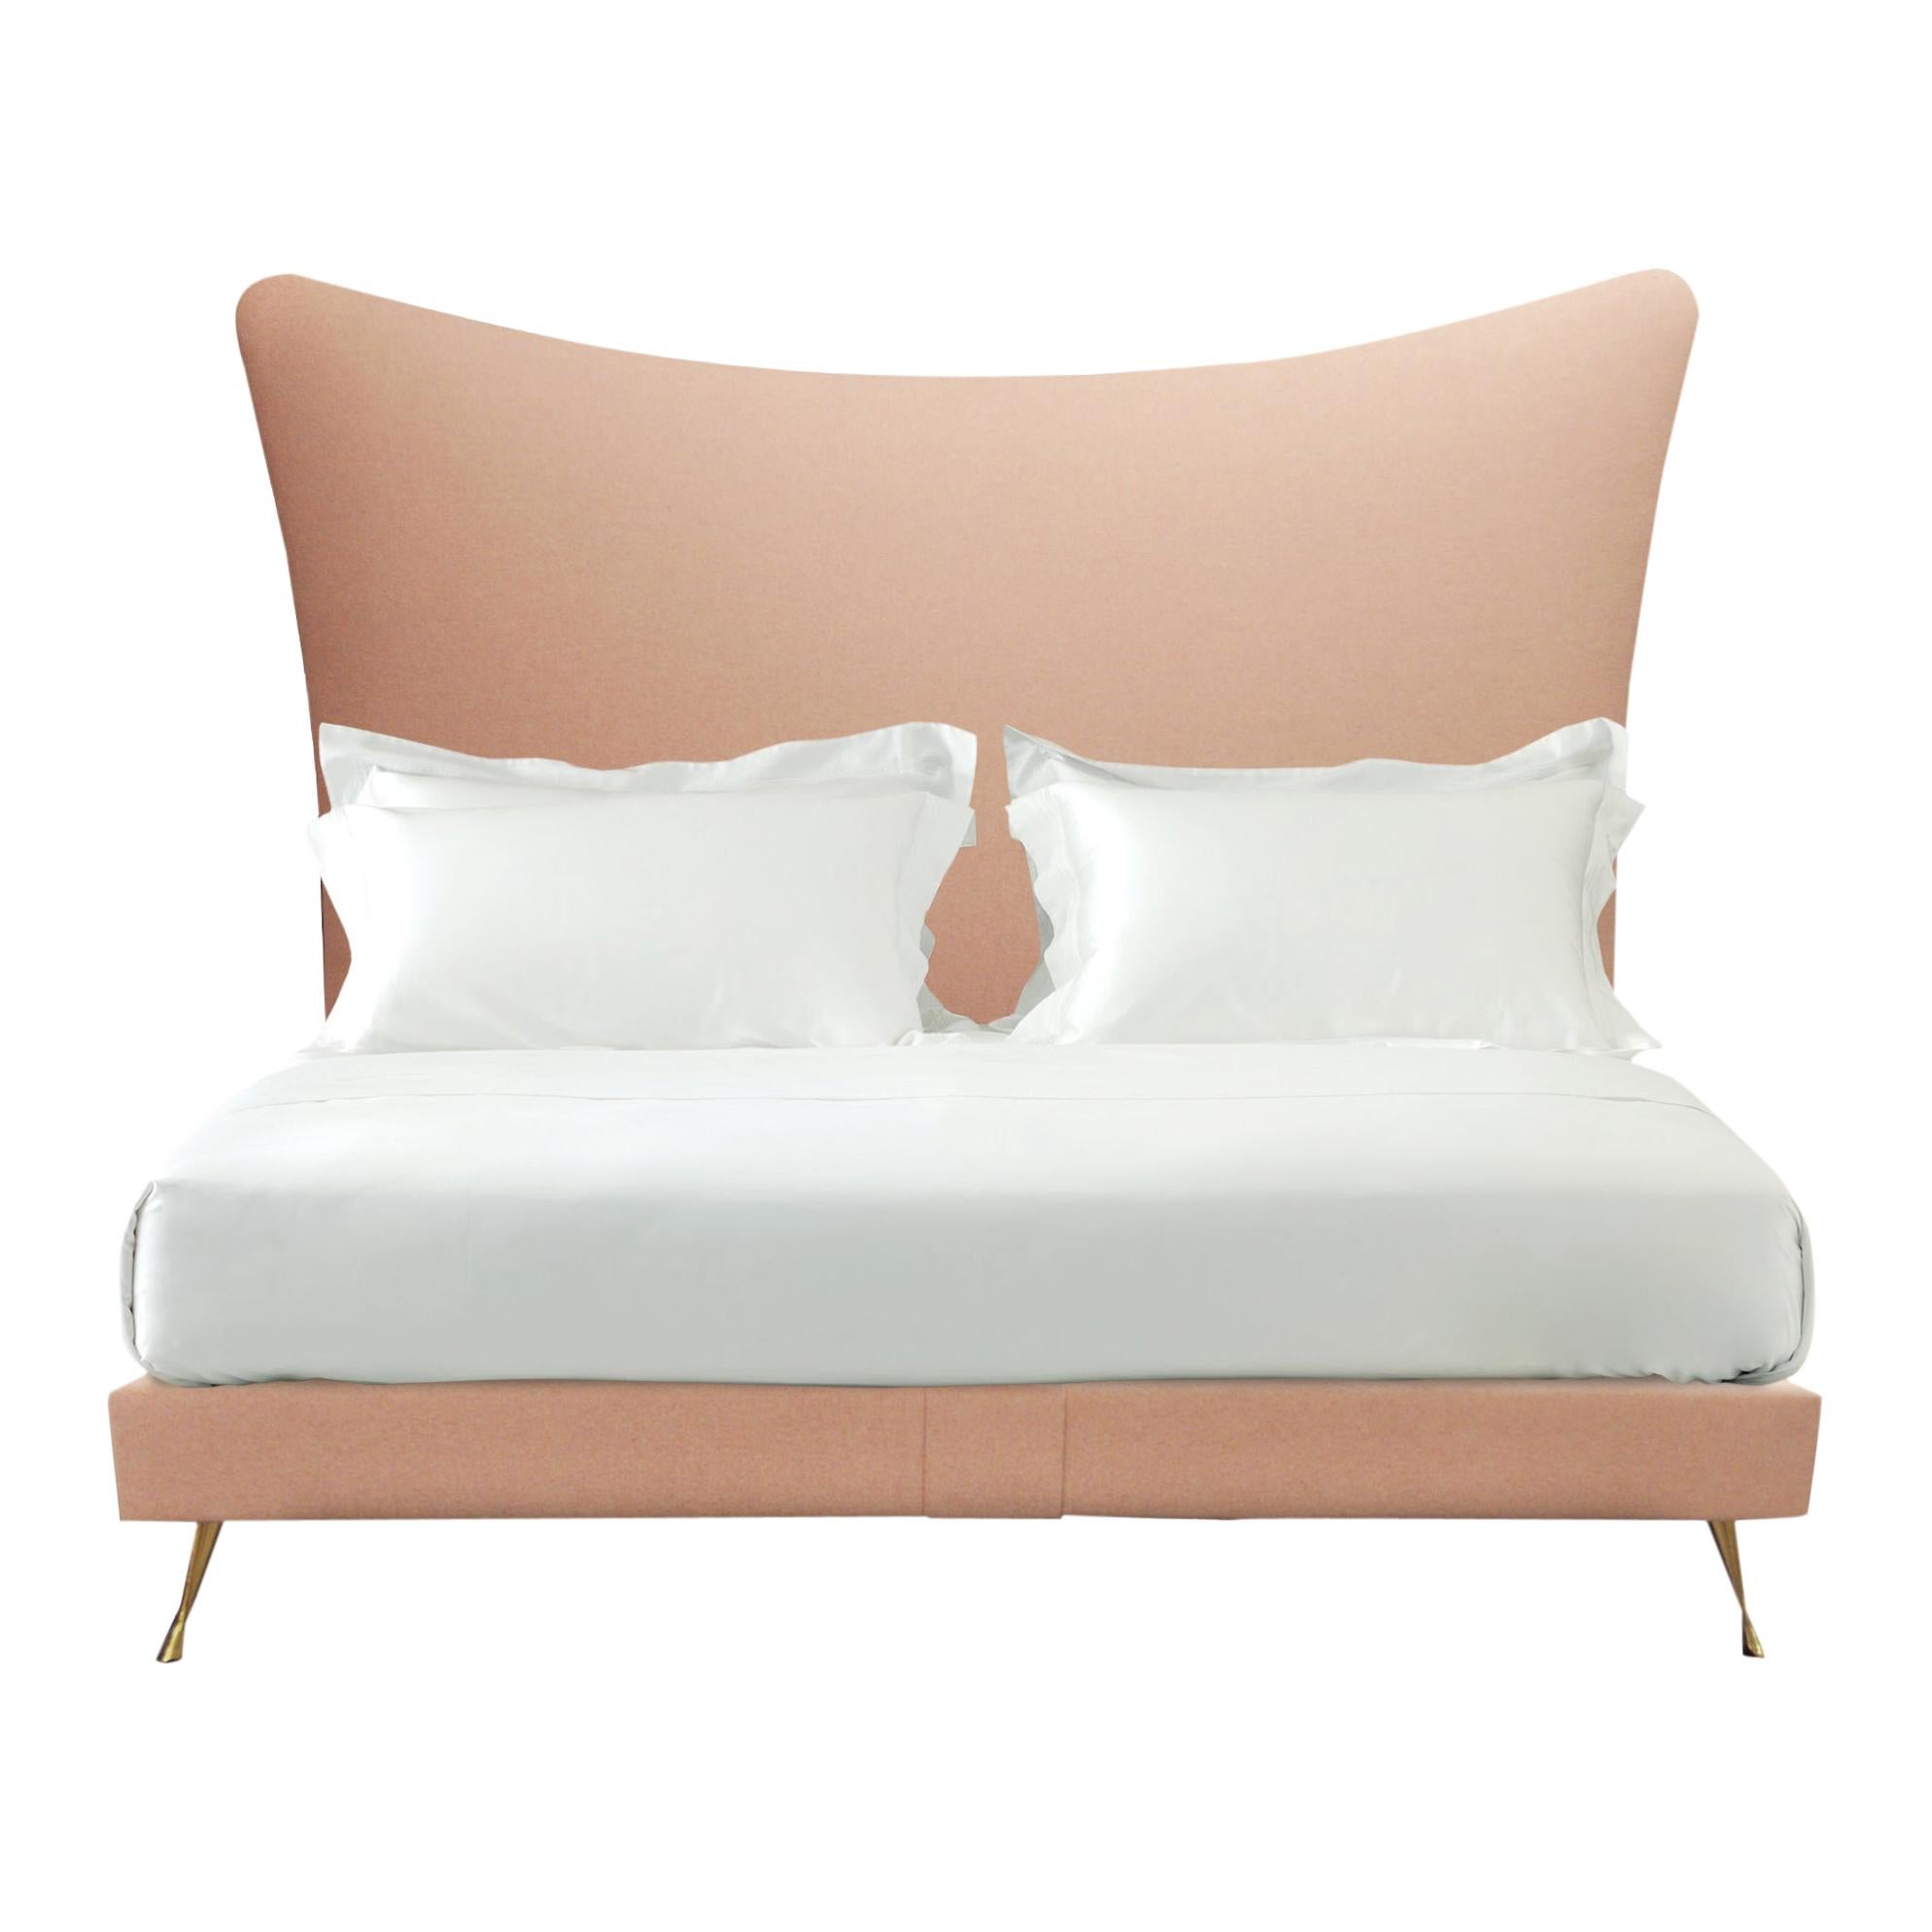 Savoir Amelia Headboard & Nº4 Bed Set, Handmade to Order, Queen Size For Sale